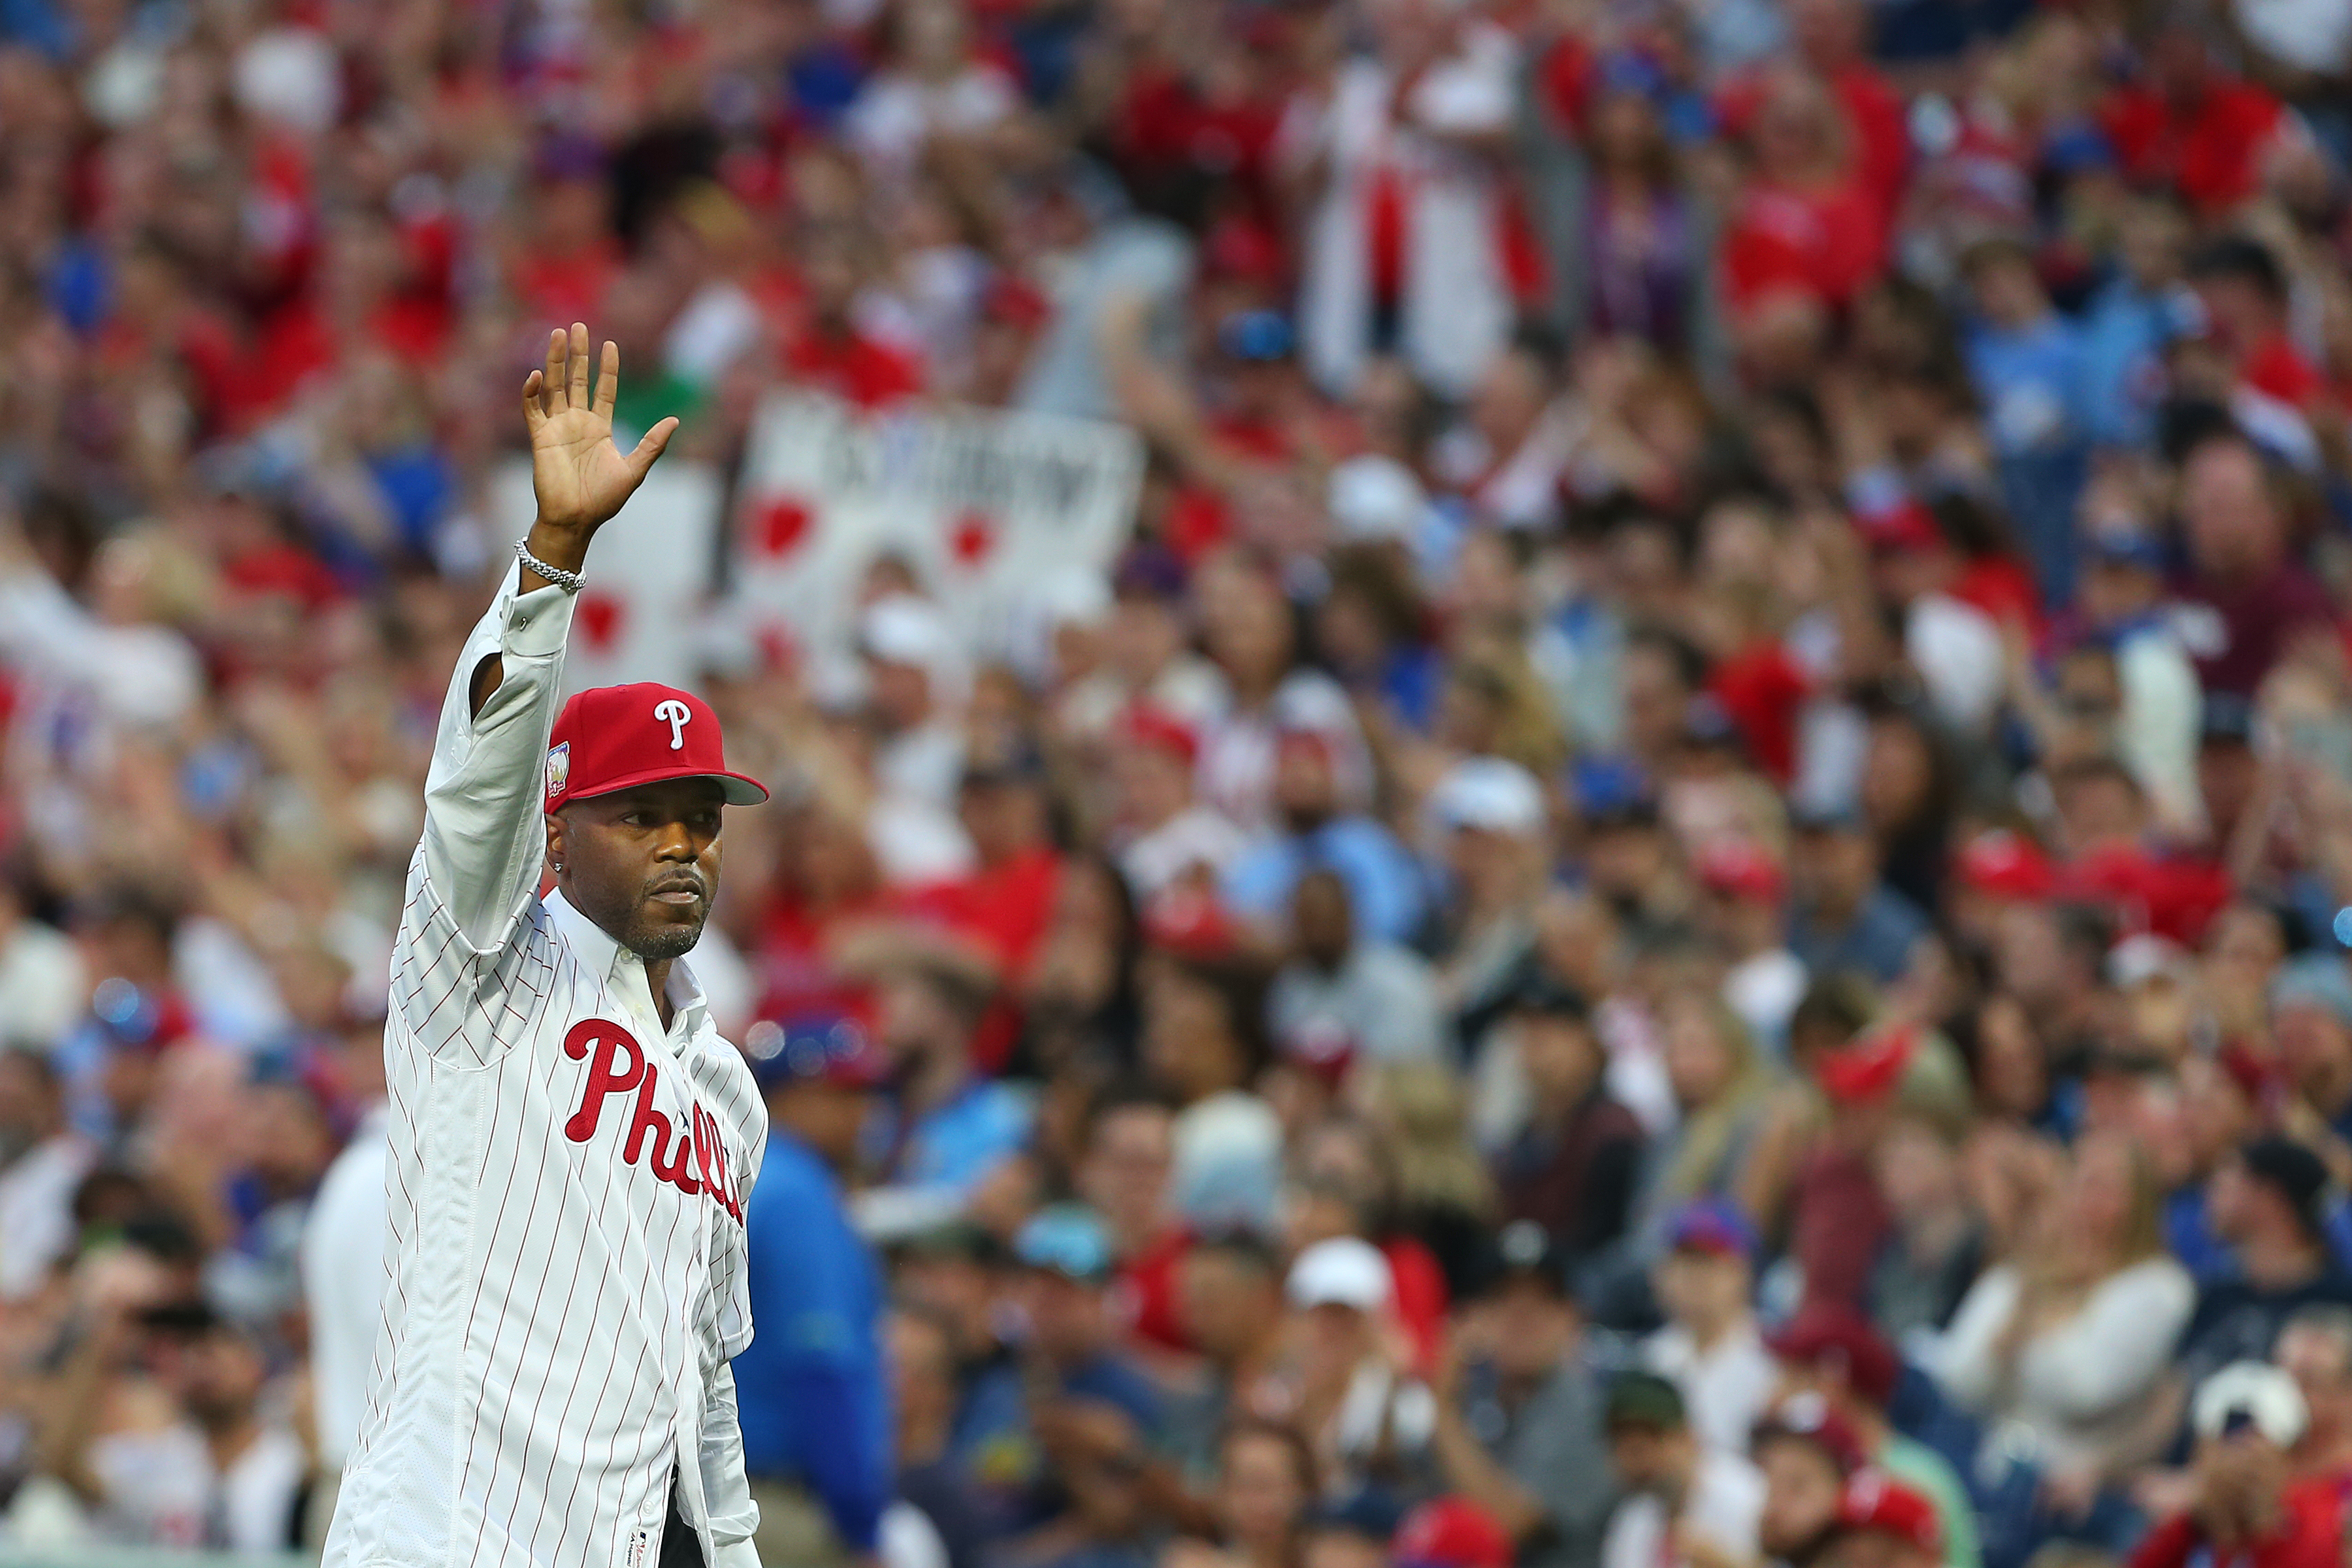 Jimmy Rollins Explains Why He Thinks There Are Fewer Black Players